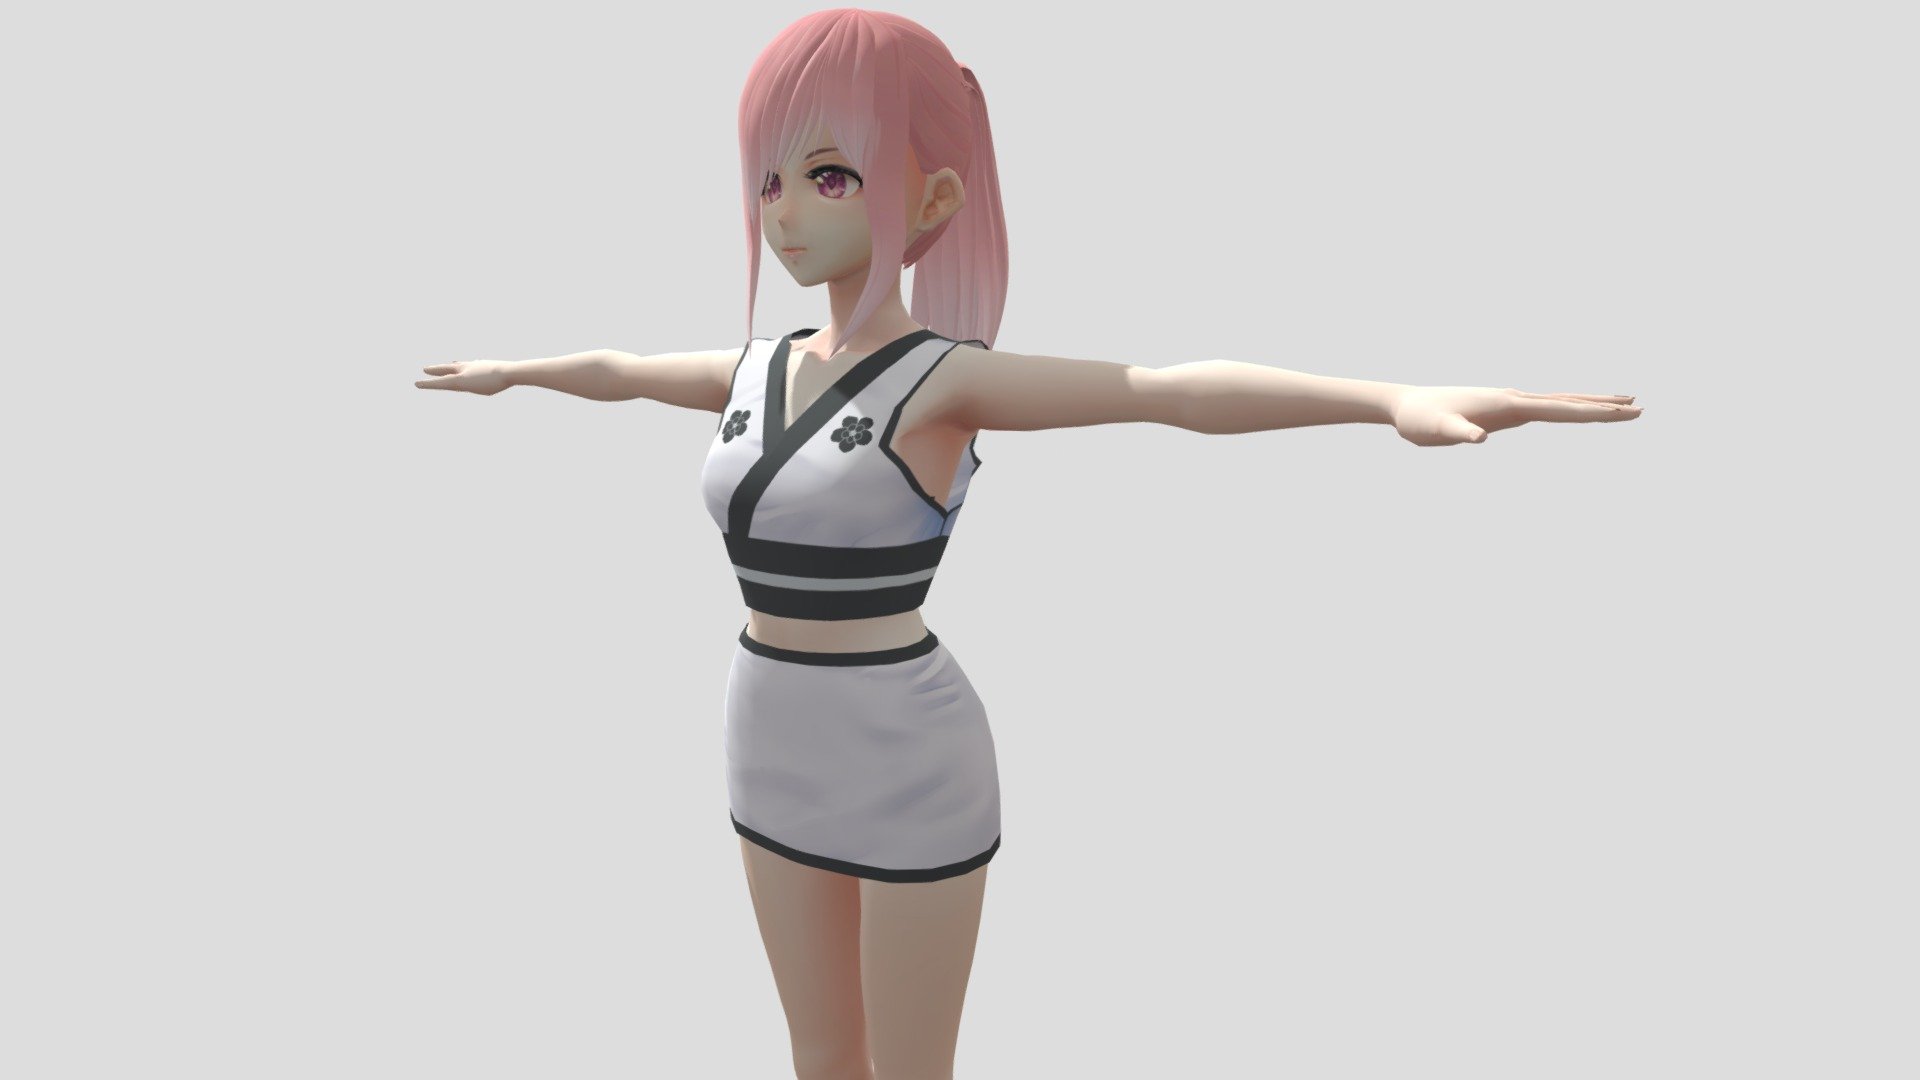 Model preview



This character model belongs to Japanese anime style, all models has been converted into fbx file using blender, users can add their favorite animations on mixamo website, then apply to unity versions above 2019



Character : Chiya

Verts:18685

Tris:26390

Fourteen textures for the character



This package contains VRM files, which can make the character module more refined, please refer to the manual for details



▶Commercial use allowed

▶Forbid secondary sales



Welcome add my website to credit :

Sketchfab

Pixiv

VRoidHub
 - 【Anime Character / alex94i60】Chiya (Ninja V2) - Buy Royalty Free 3D model by 3D動漫風角色屋 / 3D Anime Character Store (@alex94i60) 3d model